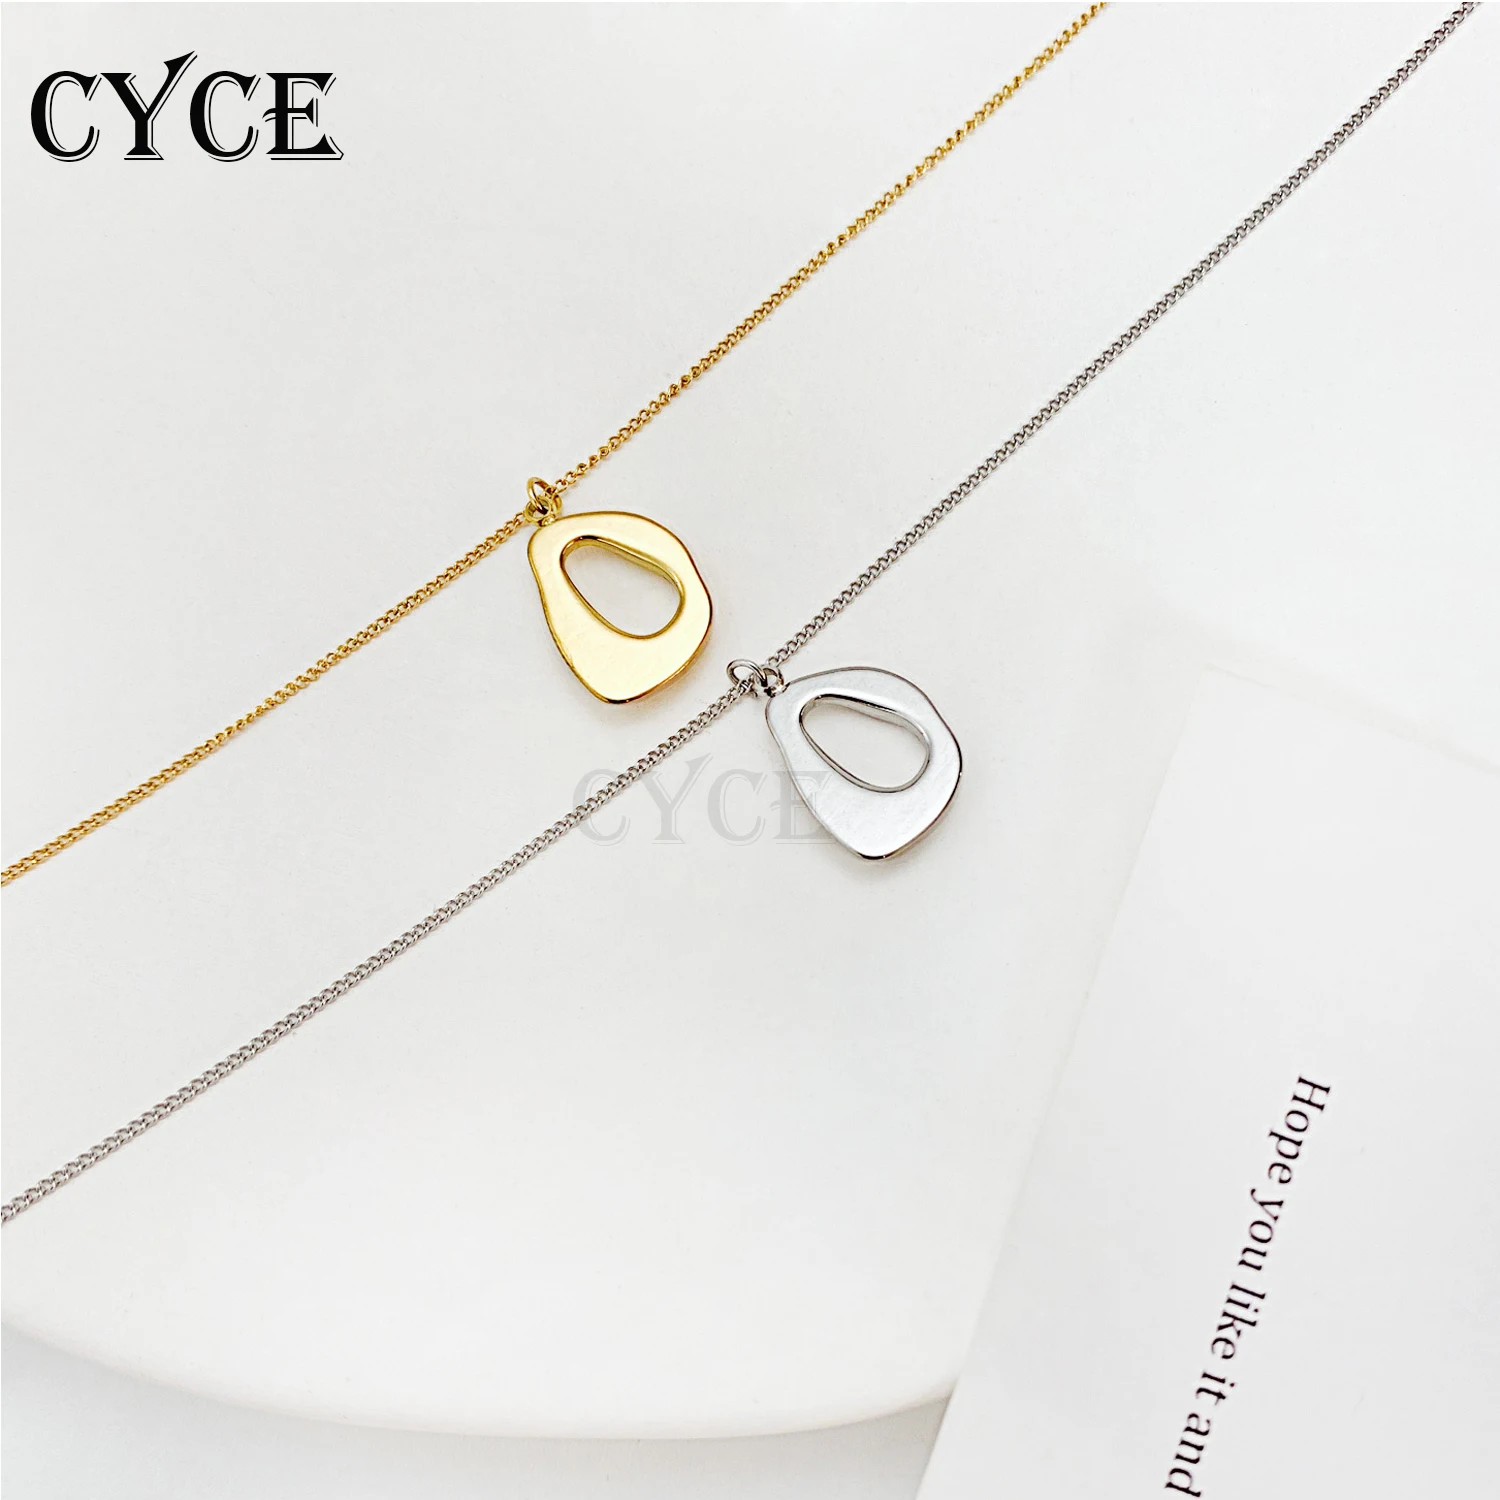 CYCE Jewelry Stainless Steel Hip Hop Necklace for Women Simple Titanium Steel Irregular Hollow Oval Pendant Necklace Accessories